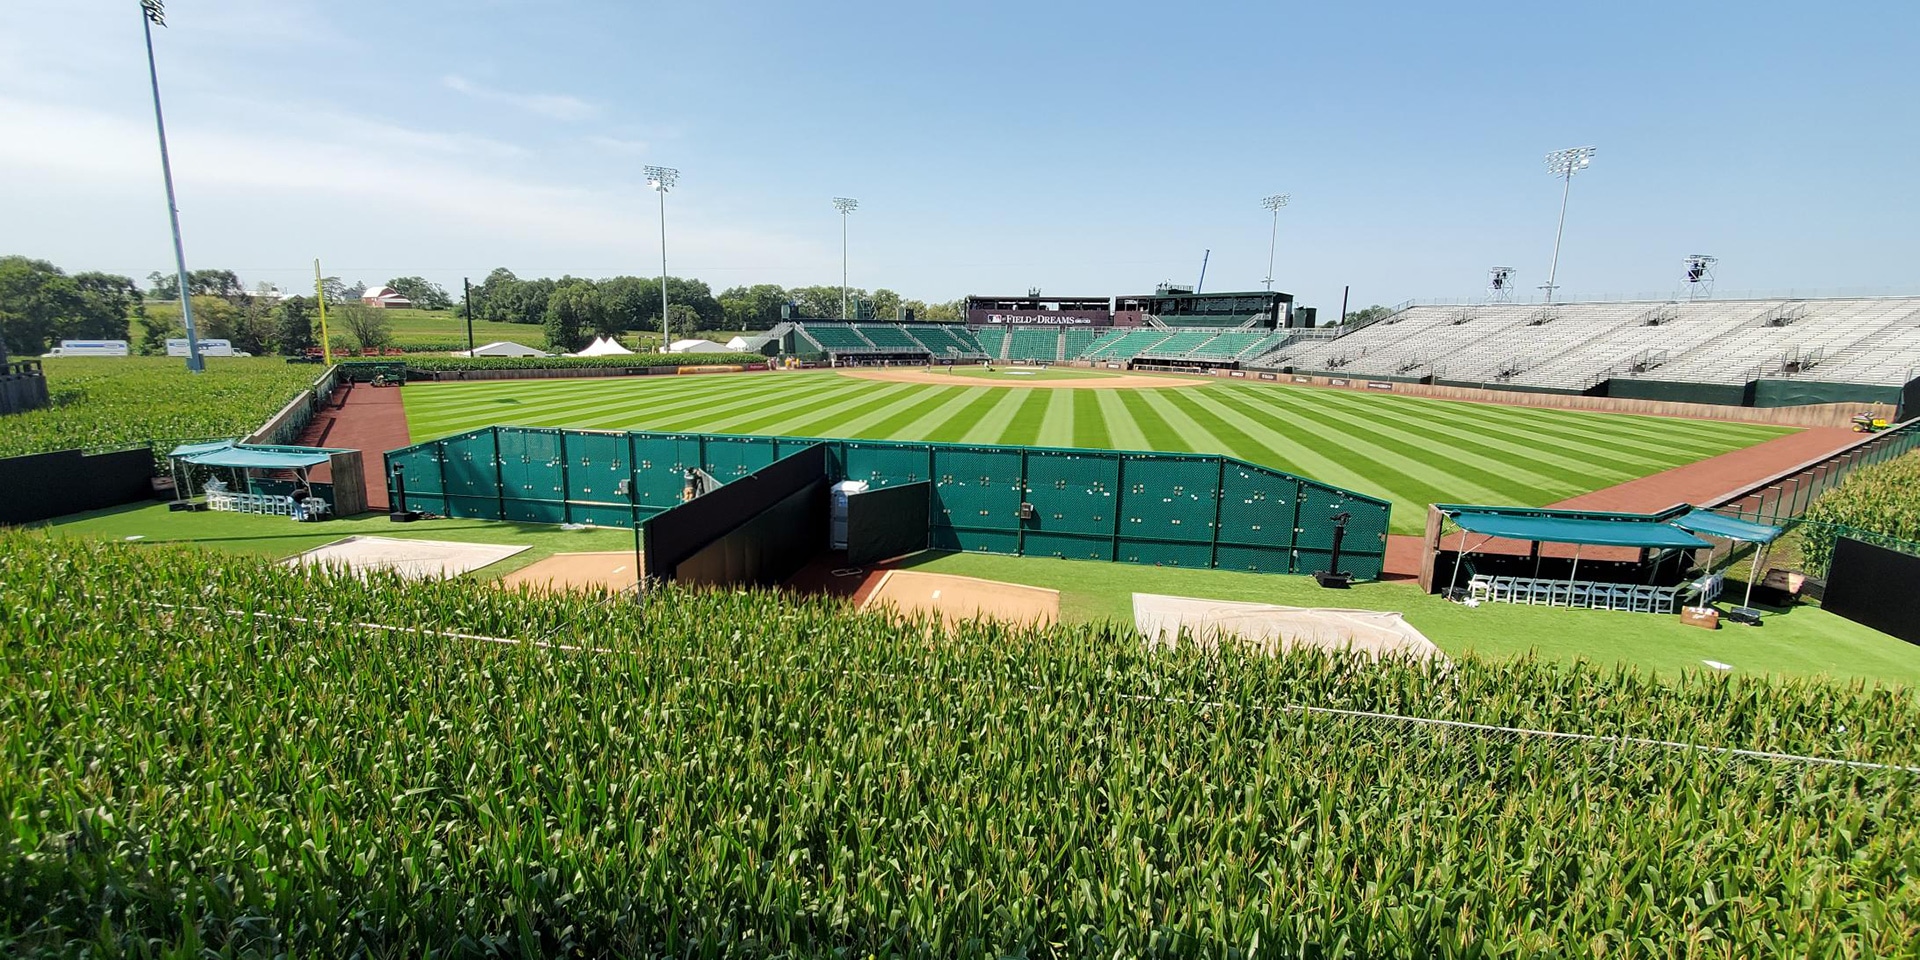 DEKALB® Brand Announces Partnership As Official Corn Seed of MLB at Field  of Dreams